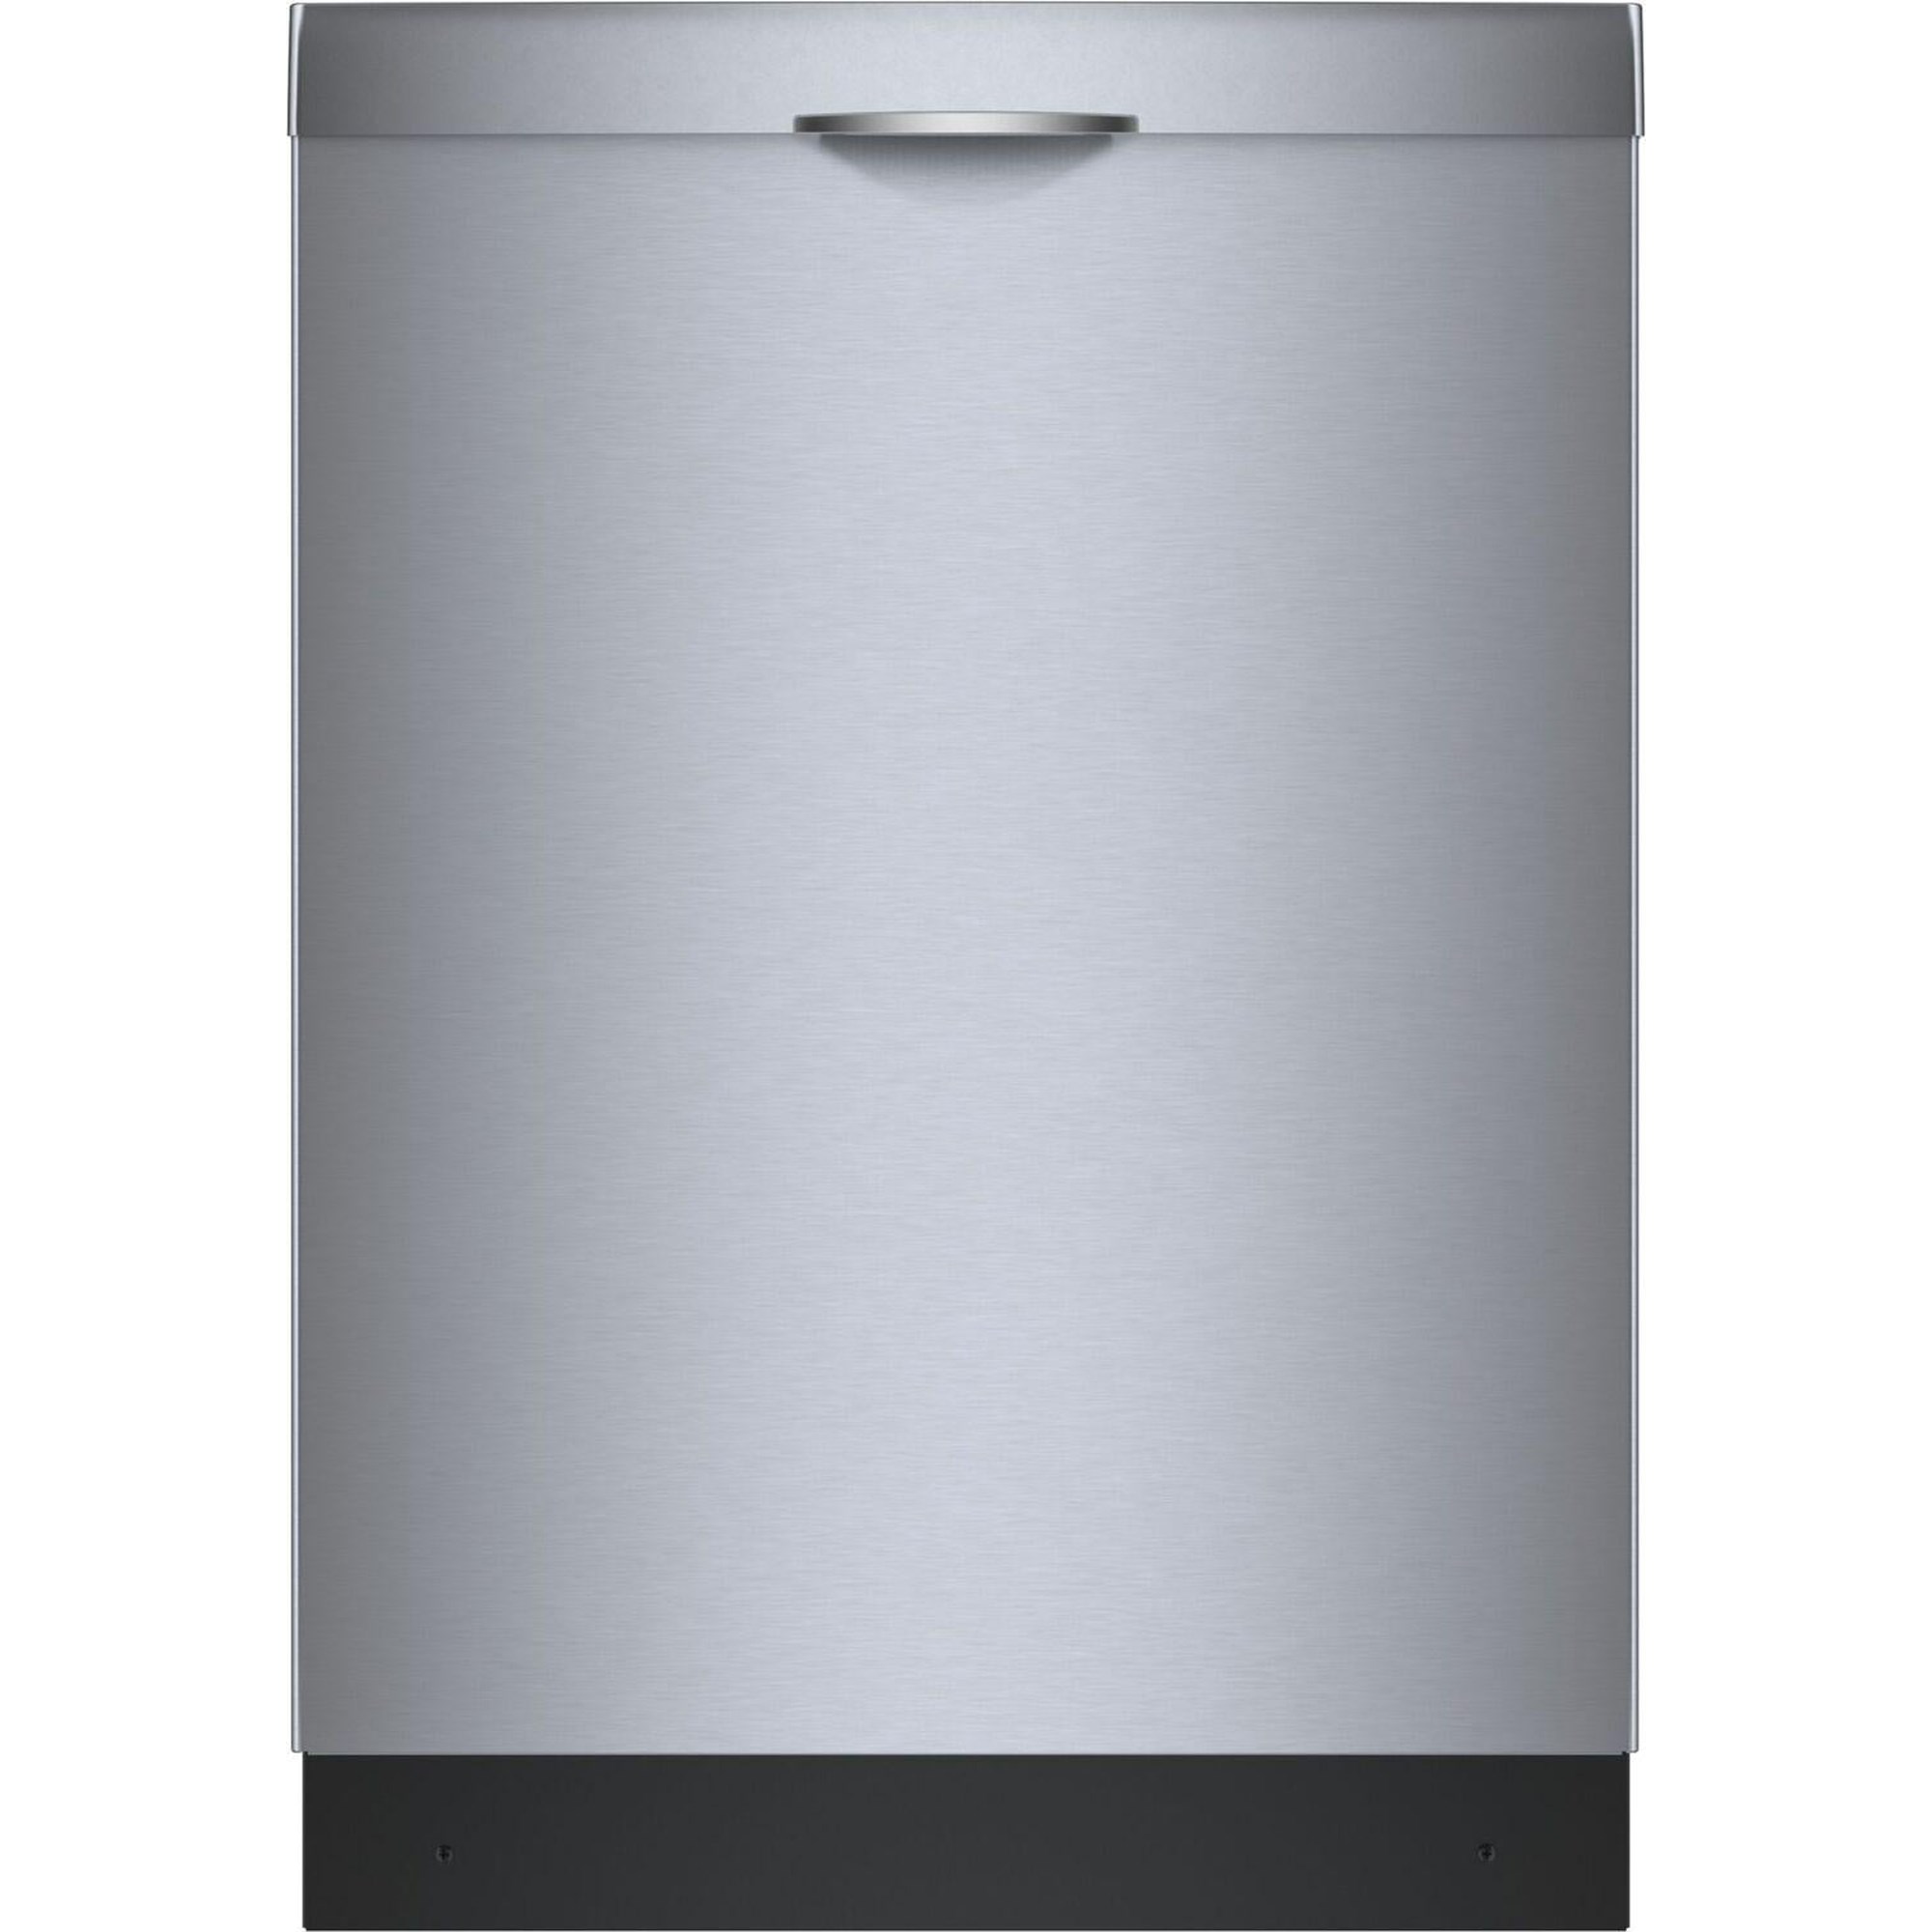 SHE53B75UC by Bosch - 300 Series Dishwasher 24 Stainless steel SHE53B75UC